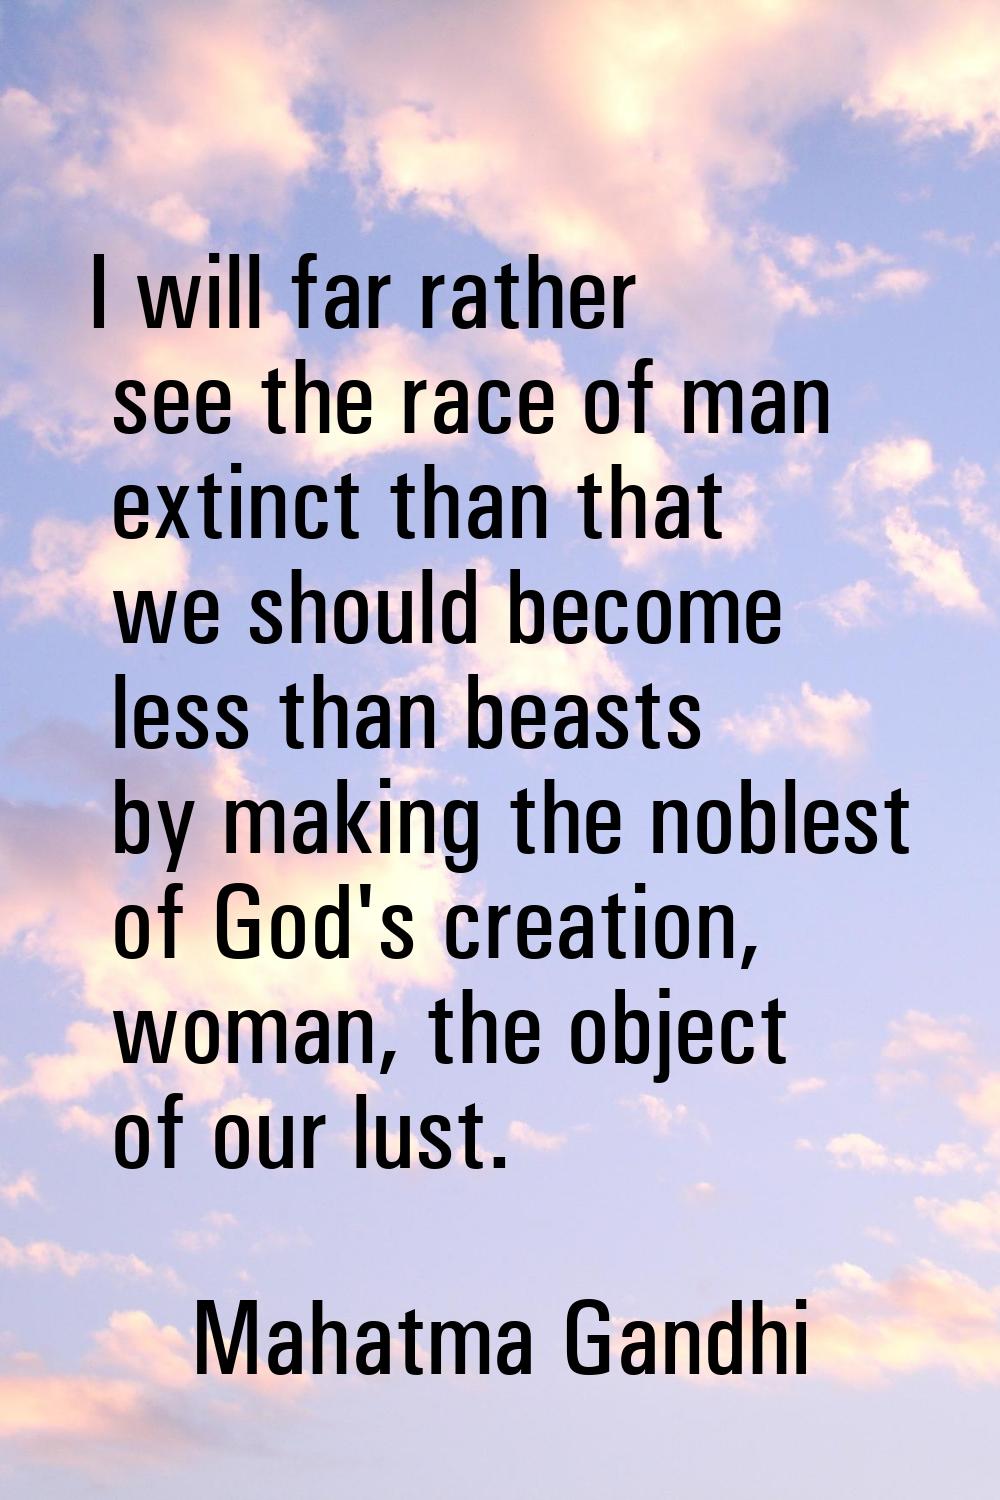 I will far rather see the race of man extinct than that we should become less than beasts by making